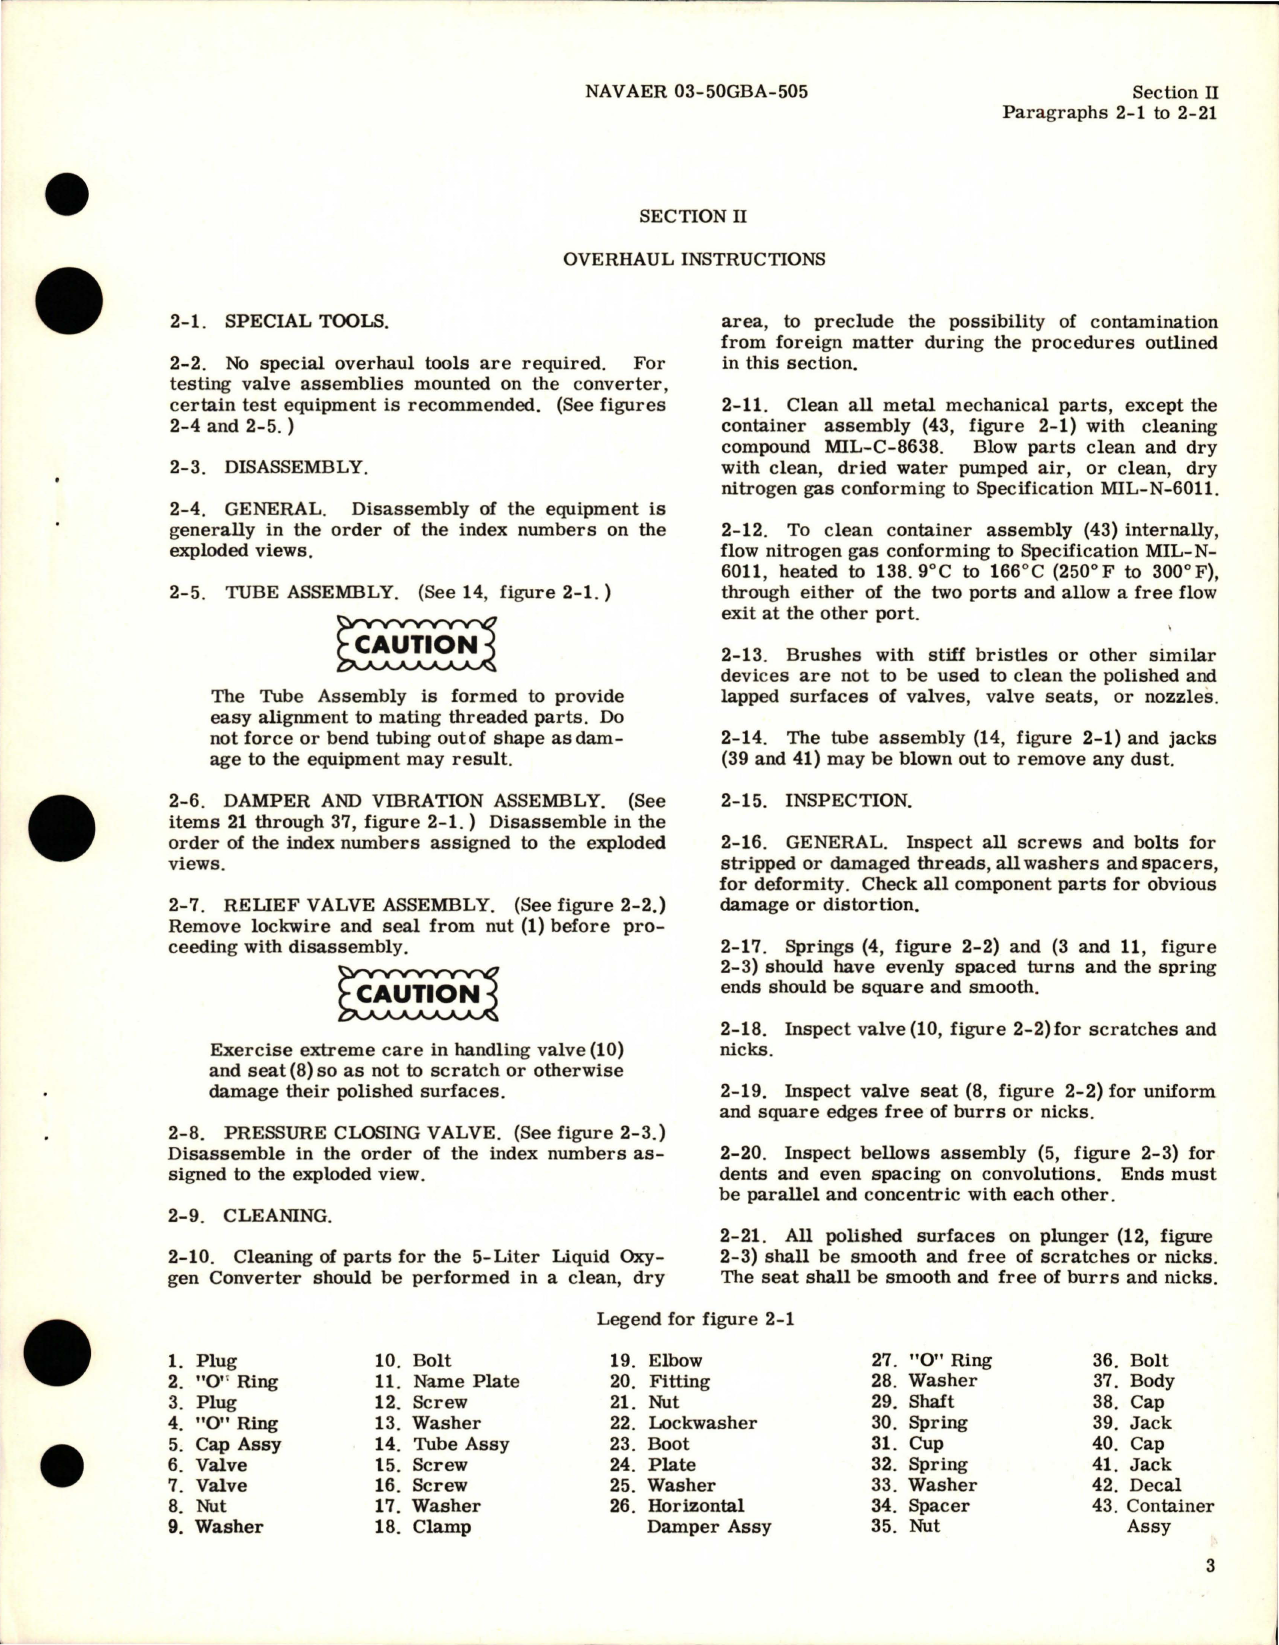 Sample page 5 from AirCorps Library document: Overhaul Instructions for 5-Liter Liquid Oxygen Converter - Part 141000-1 